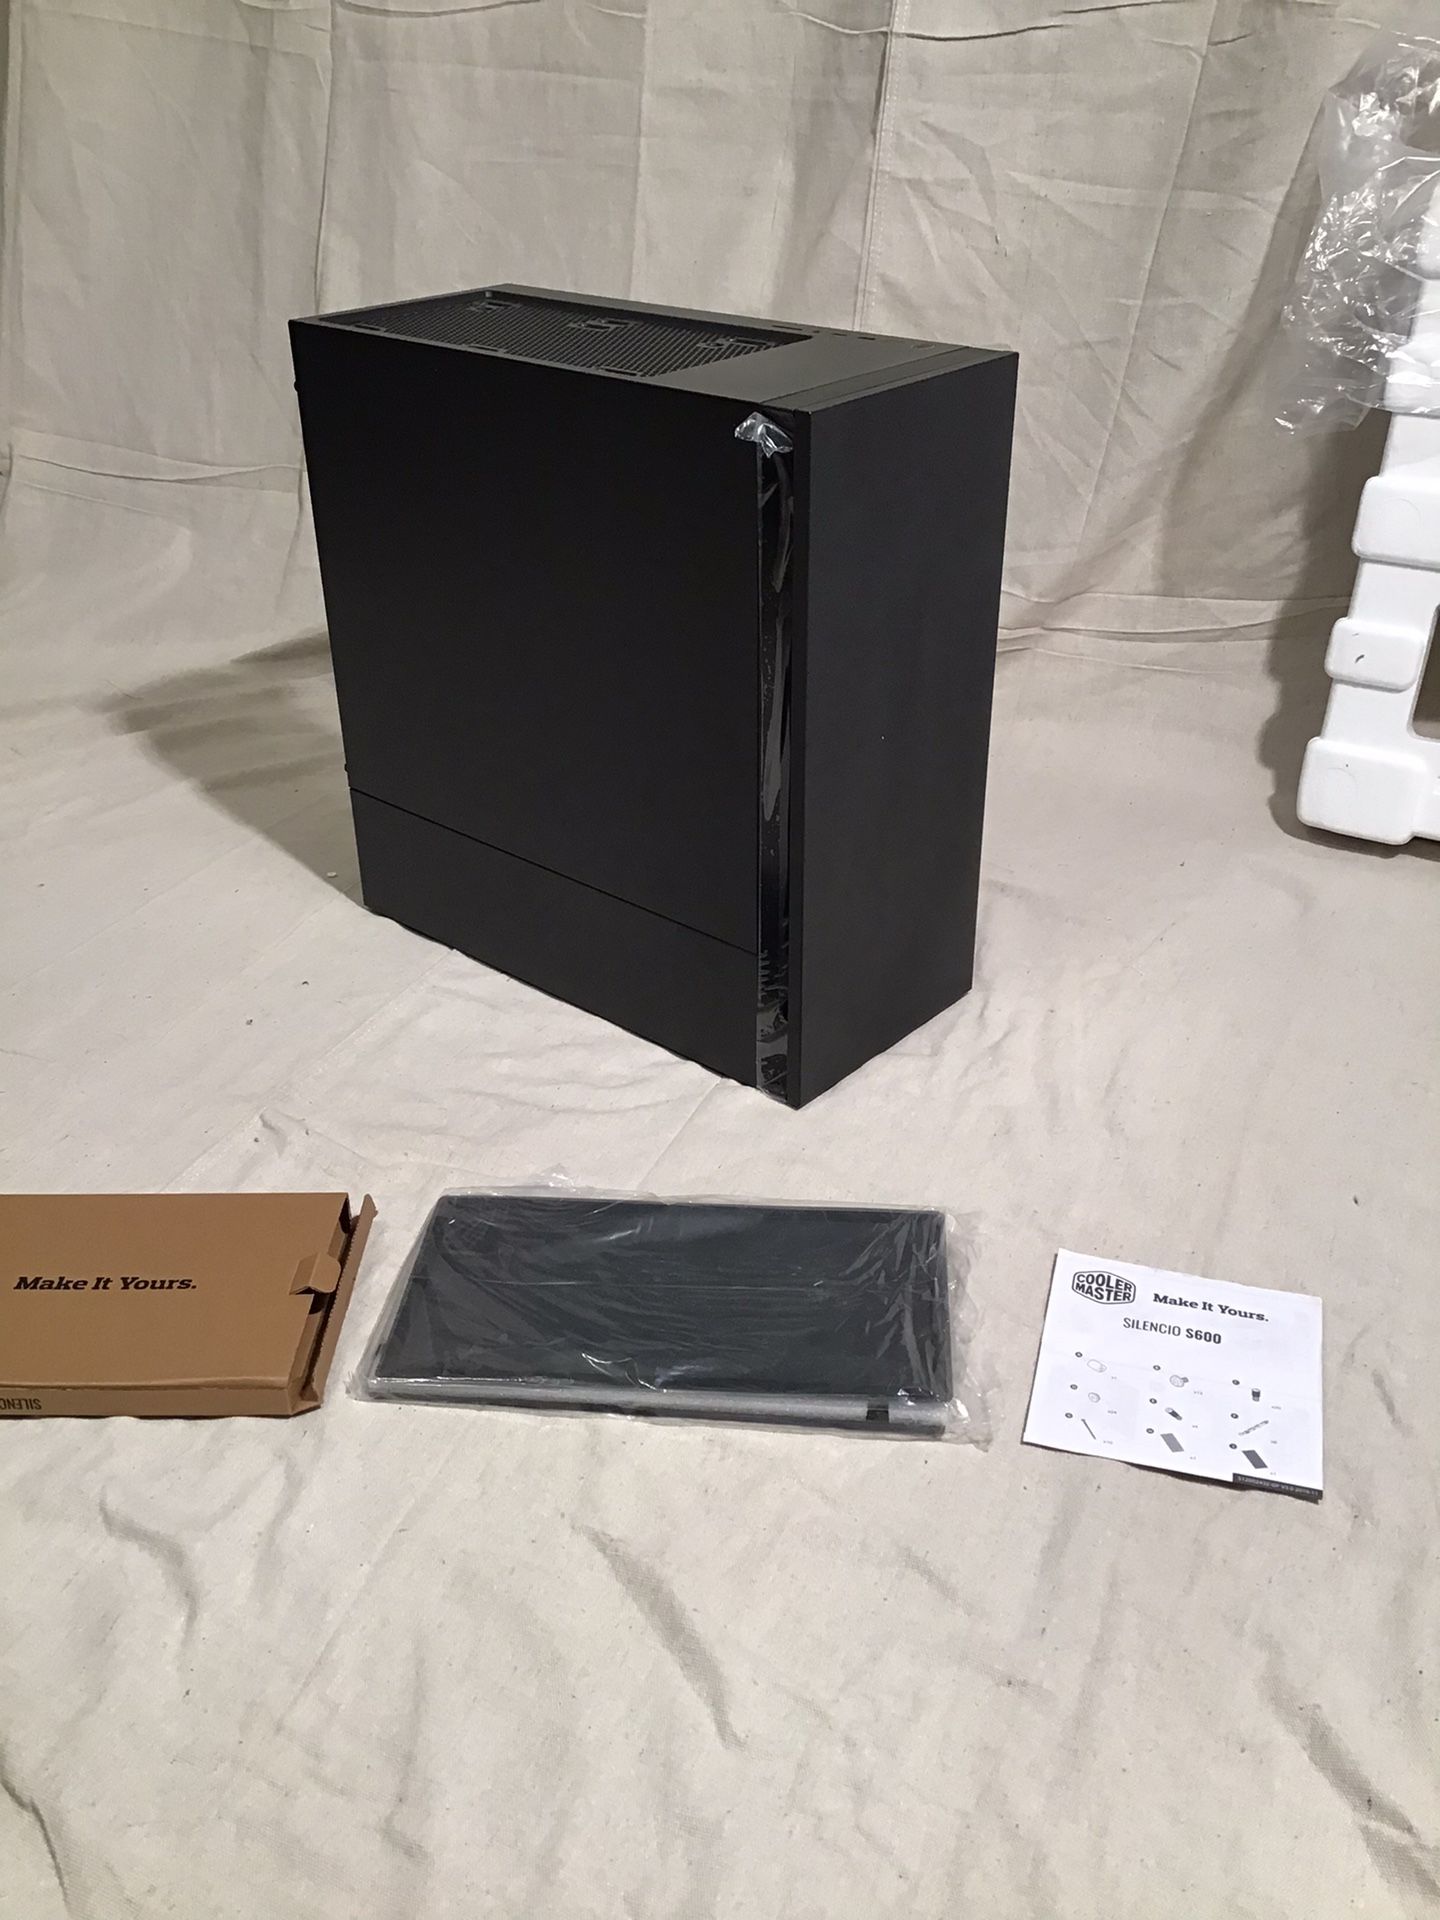 NEW Cooler Master MCS-S600-KN5N-S00 Silencio S600 Mid-Tower Computer Case